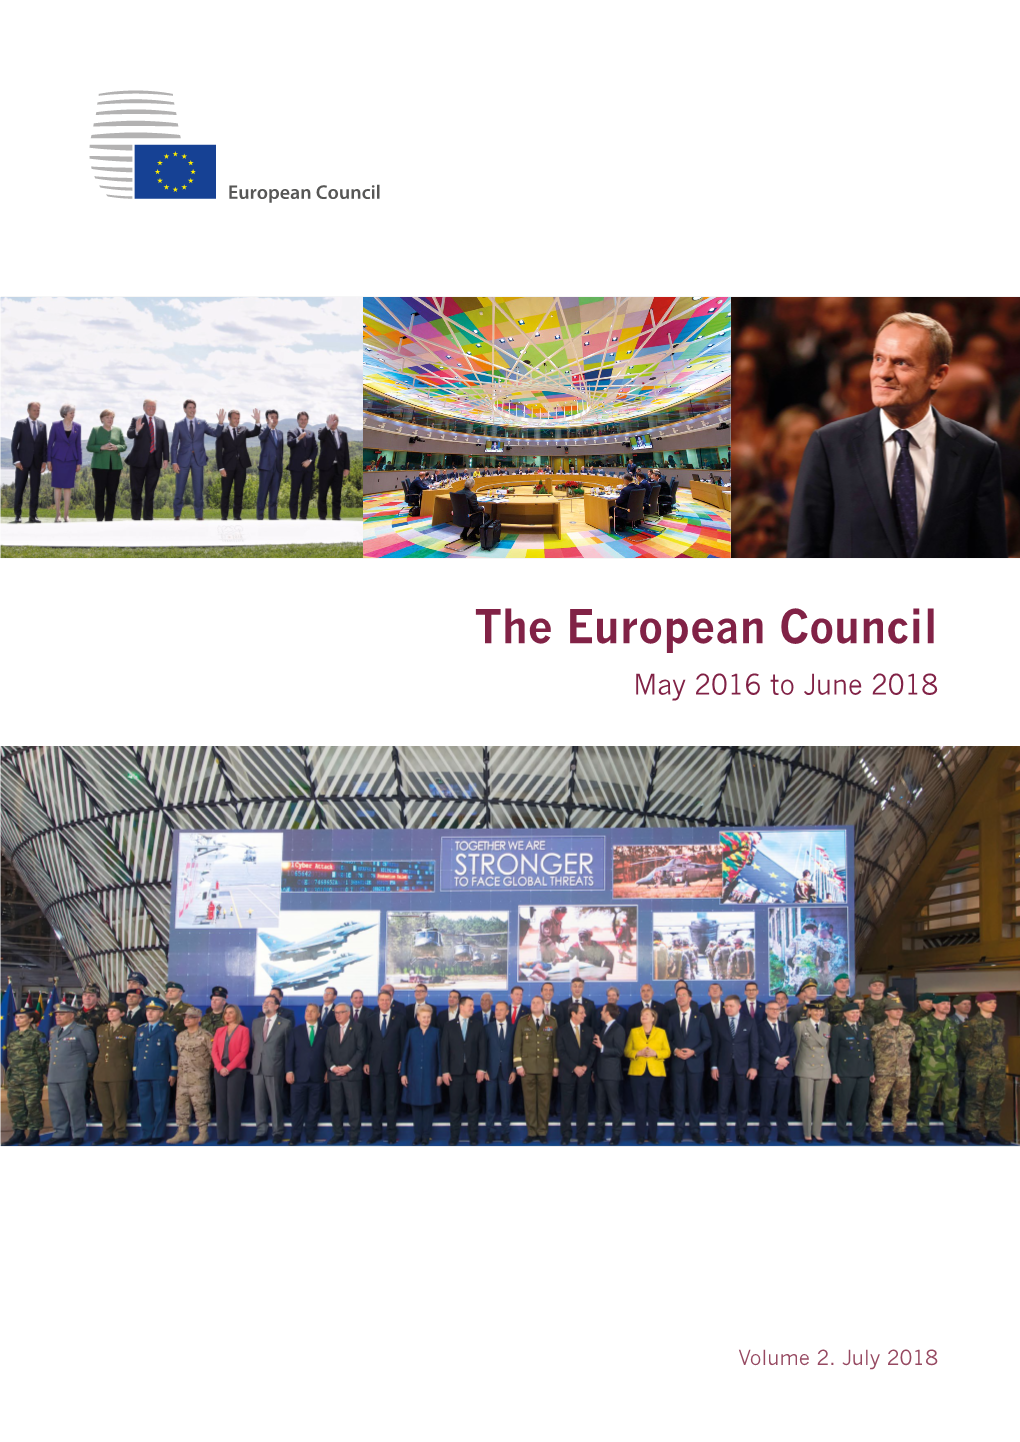 The European Council May 2016 to June 2018